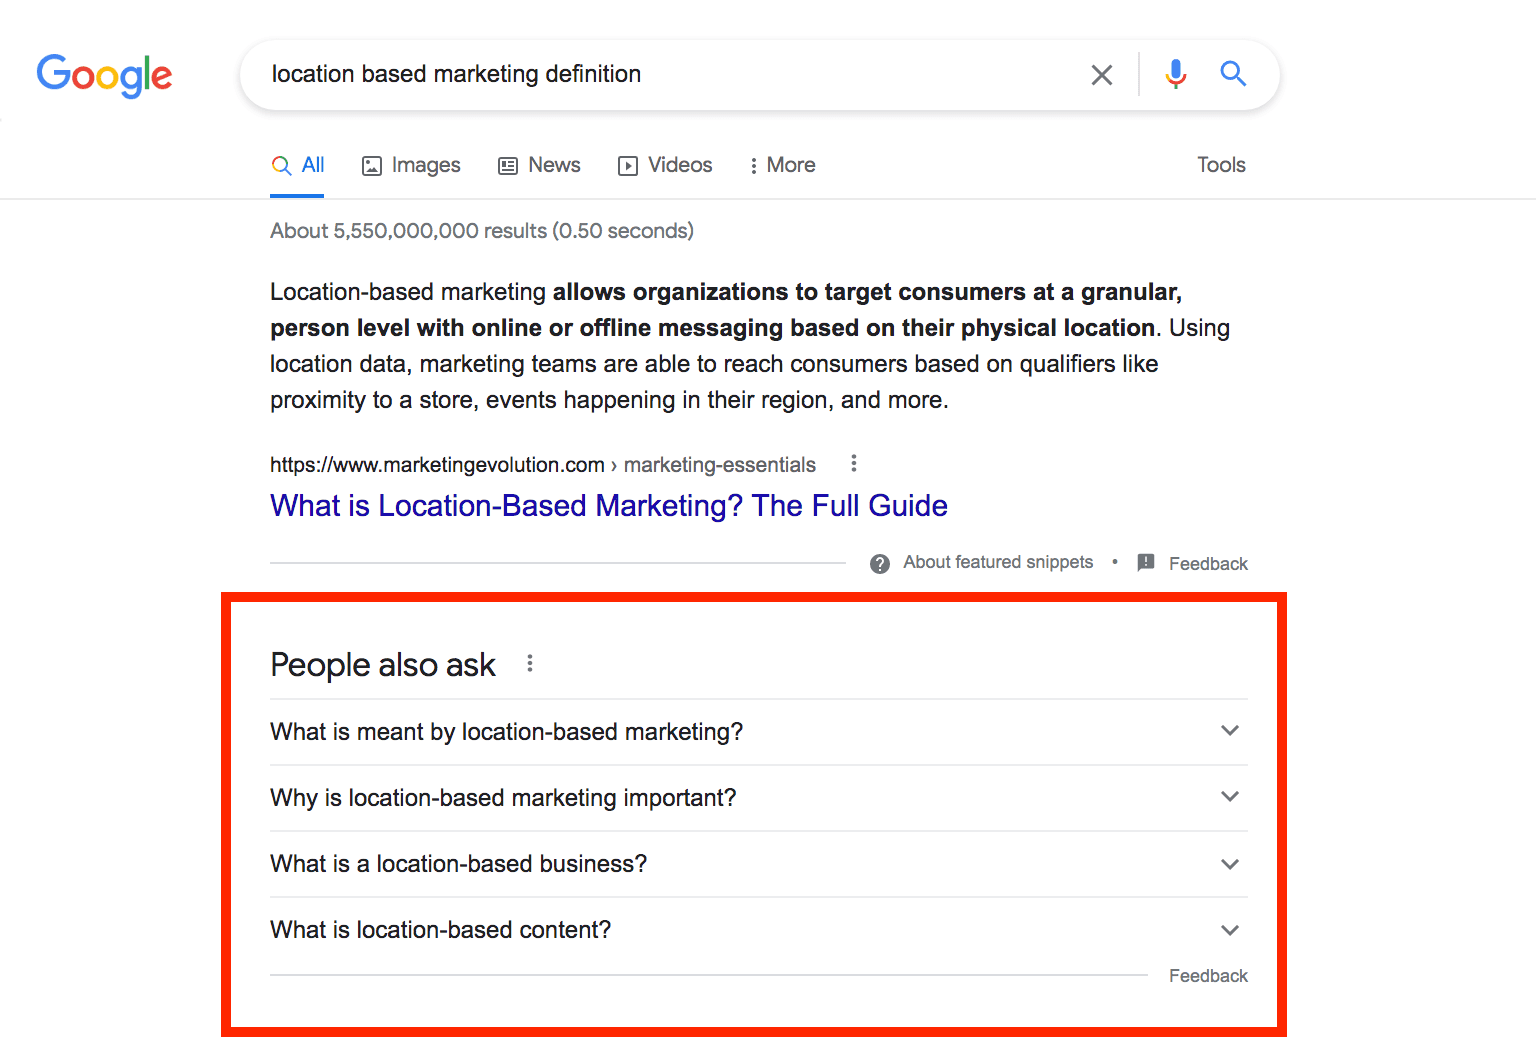 Google people also ask results